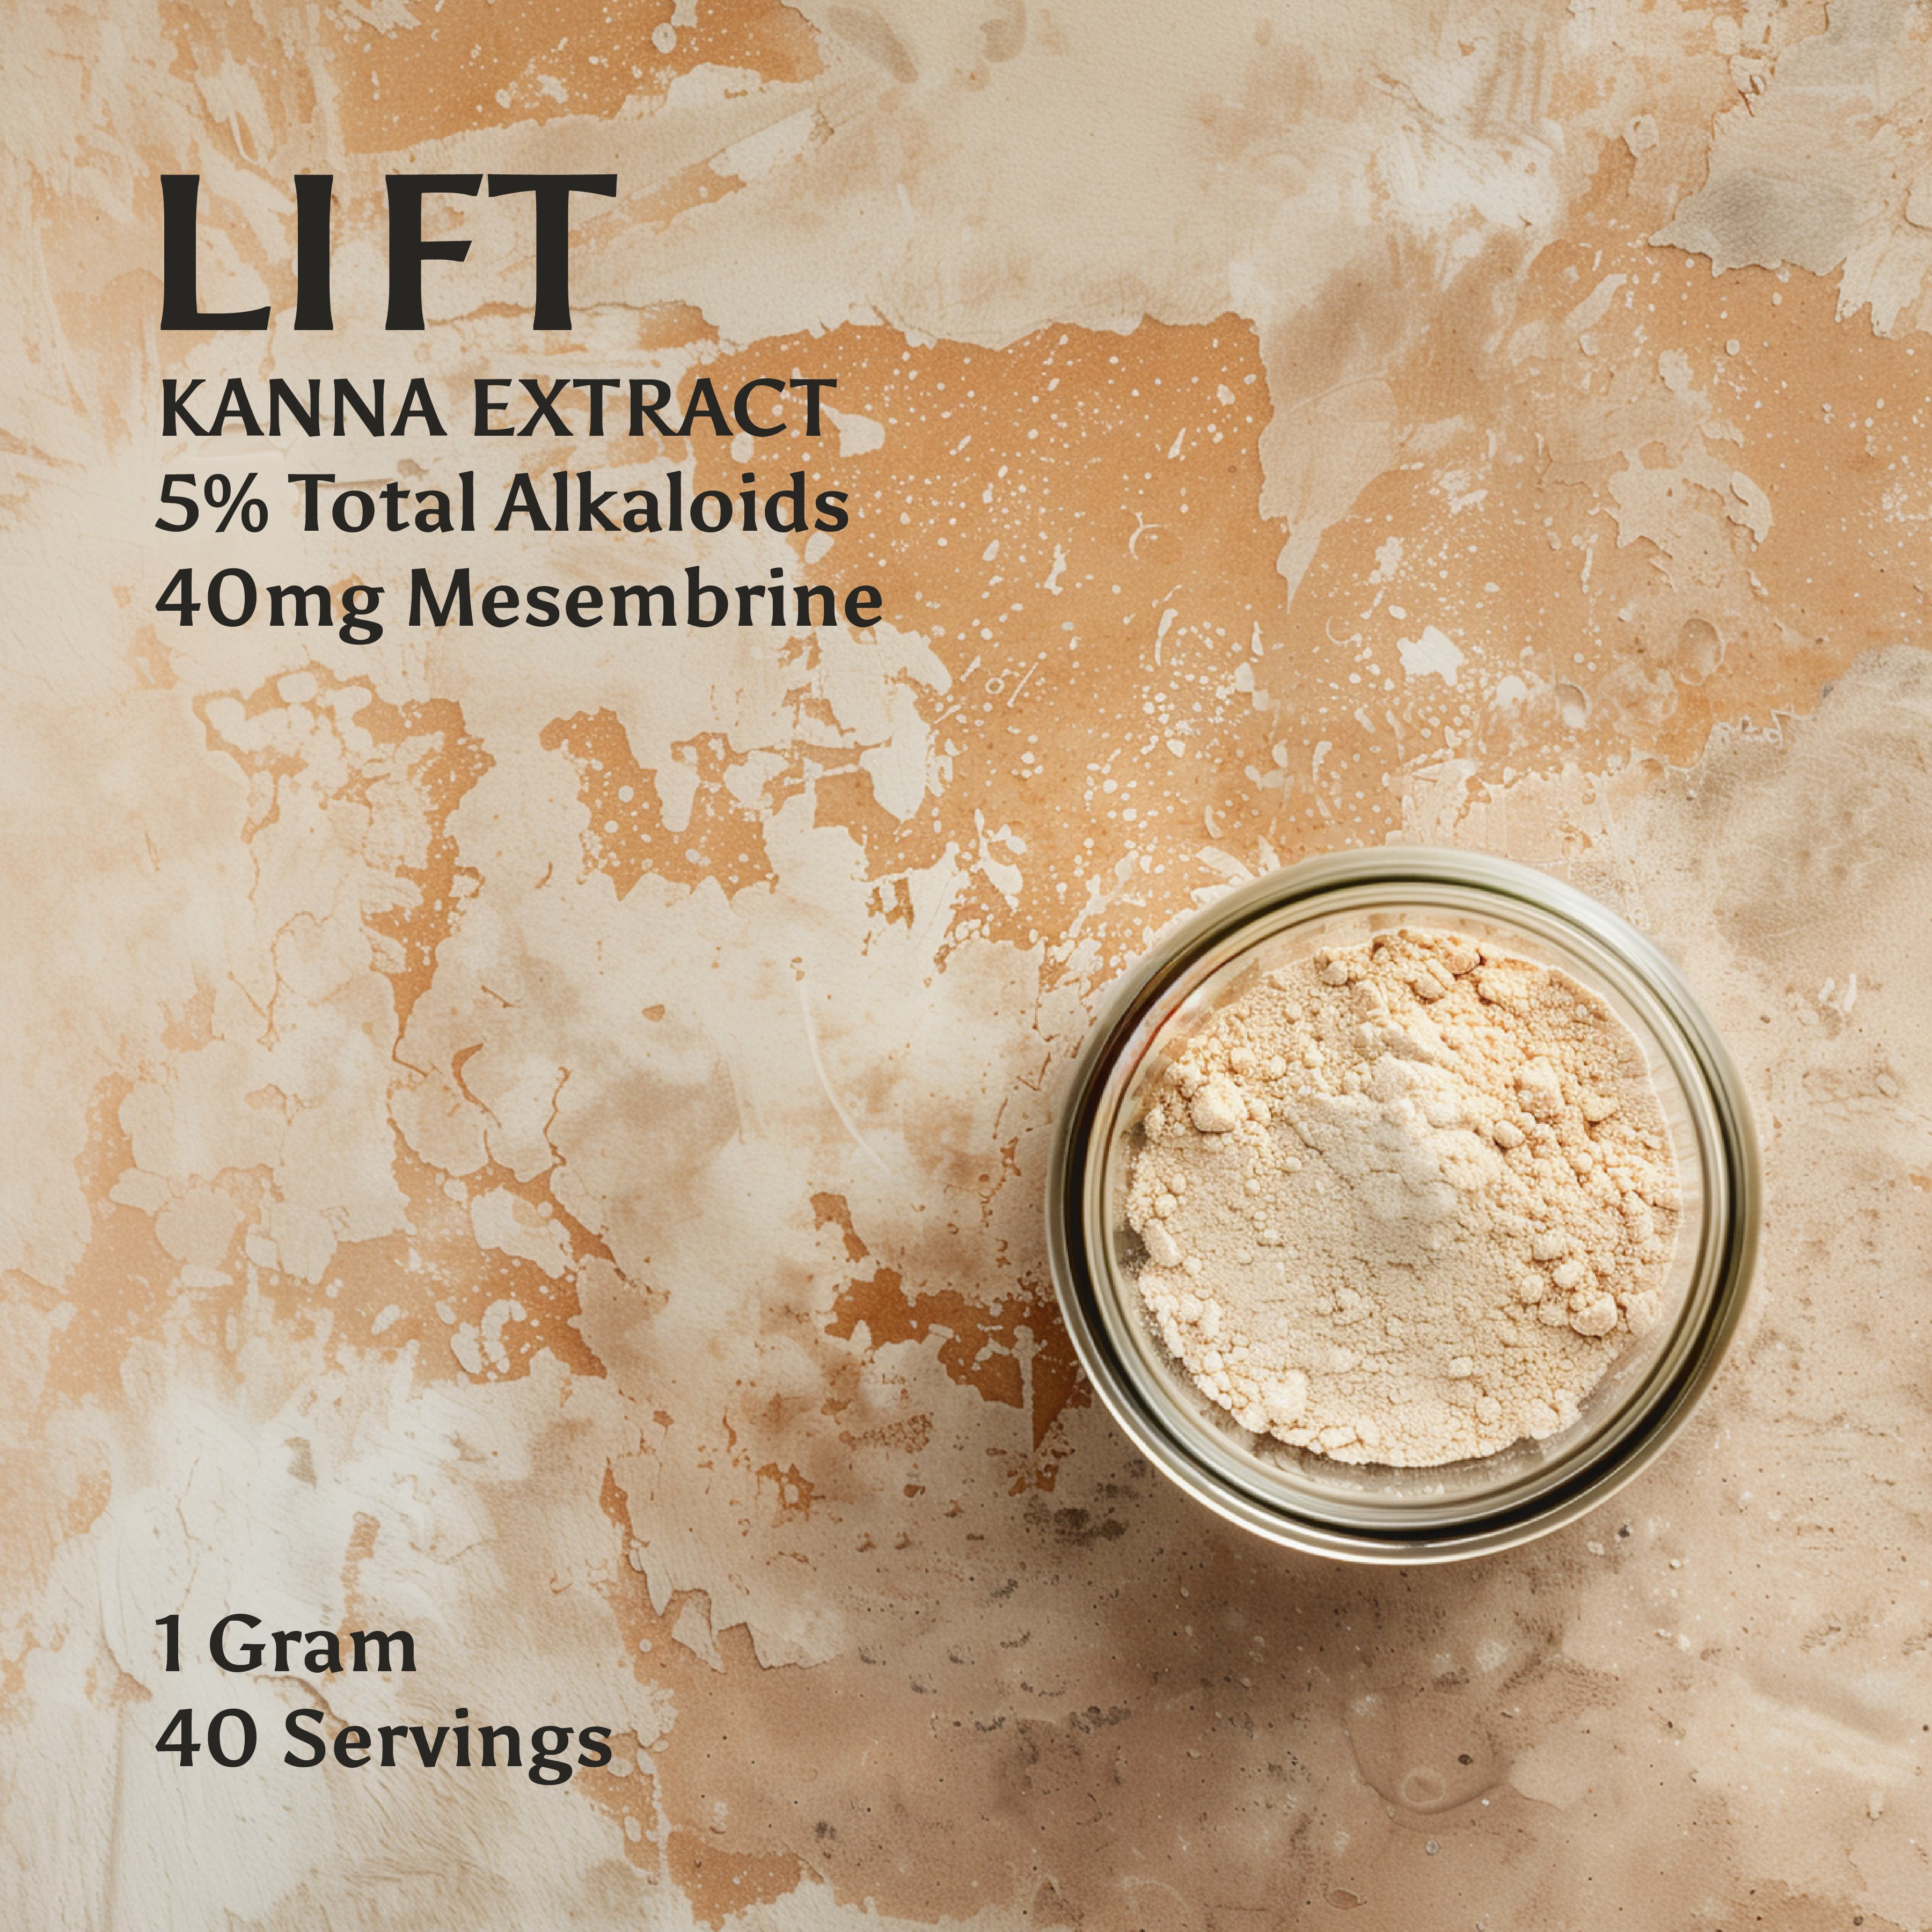 Kanna Extract Company LIFT sceletium tortuosum extract powder on rough earth tone background with text reading lift your mood and feel happy, 15% total alkaloids 13% mesembrine, contains x40 25mg servings